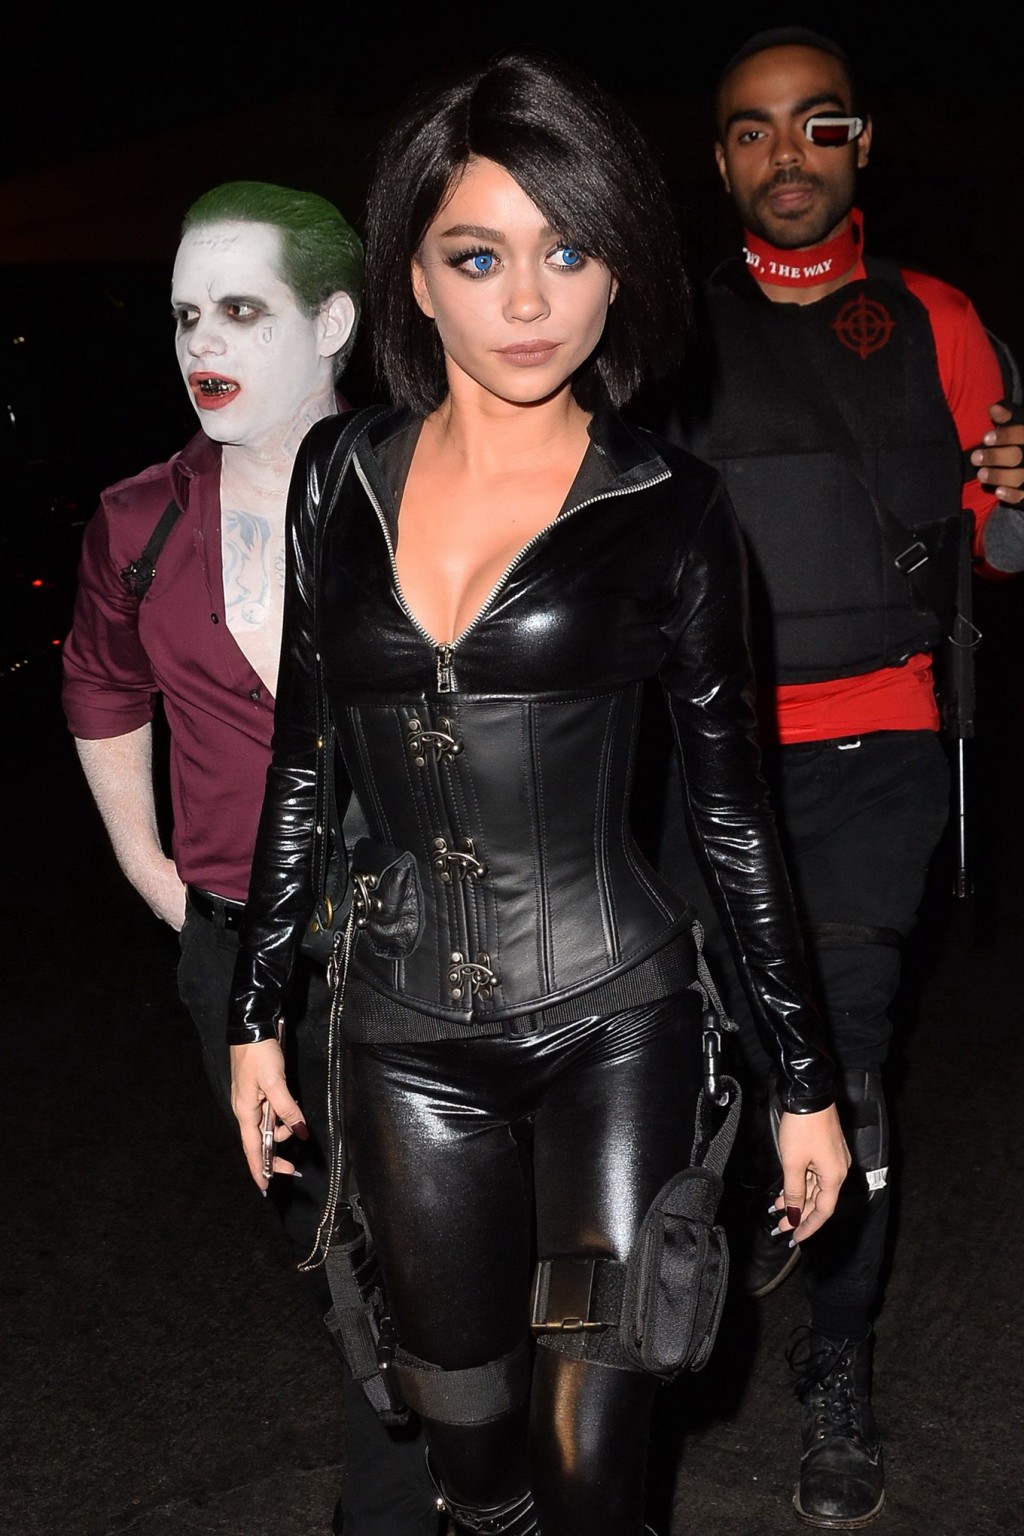 Sarah Hyland stunning in tight black leather for Halloween #75150500